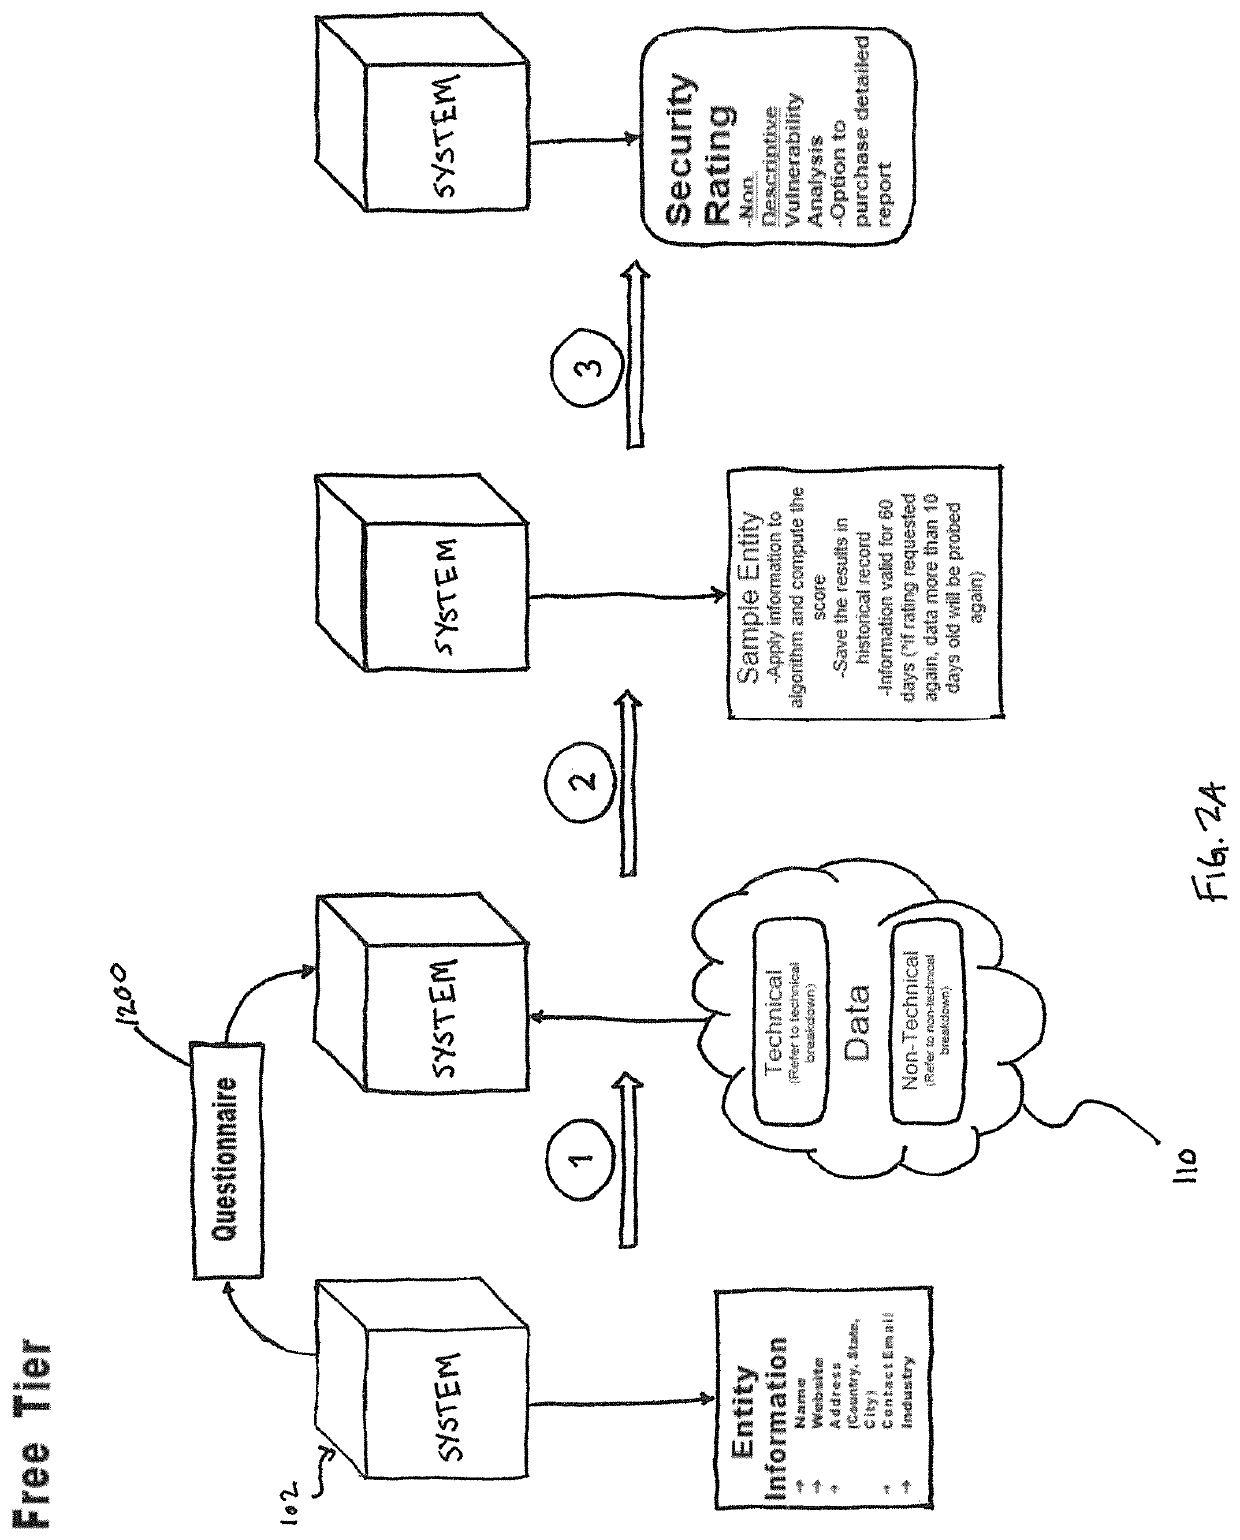 System and method for determining cybersecurity rating and risk scoring